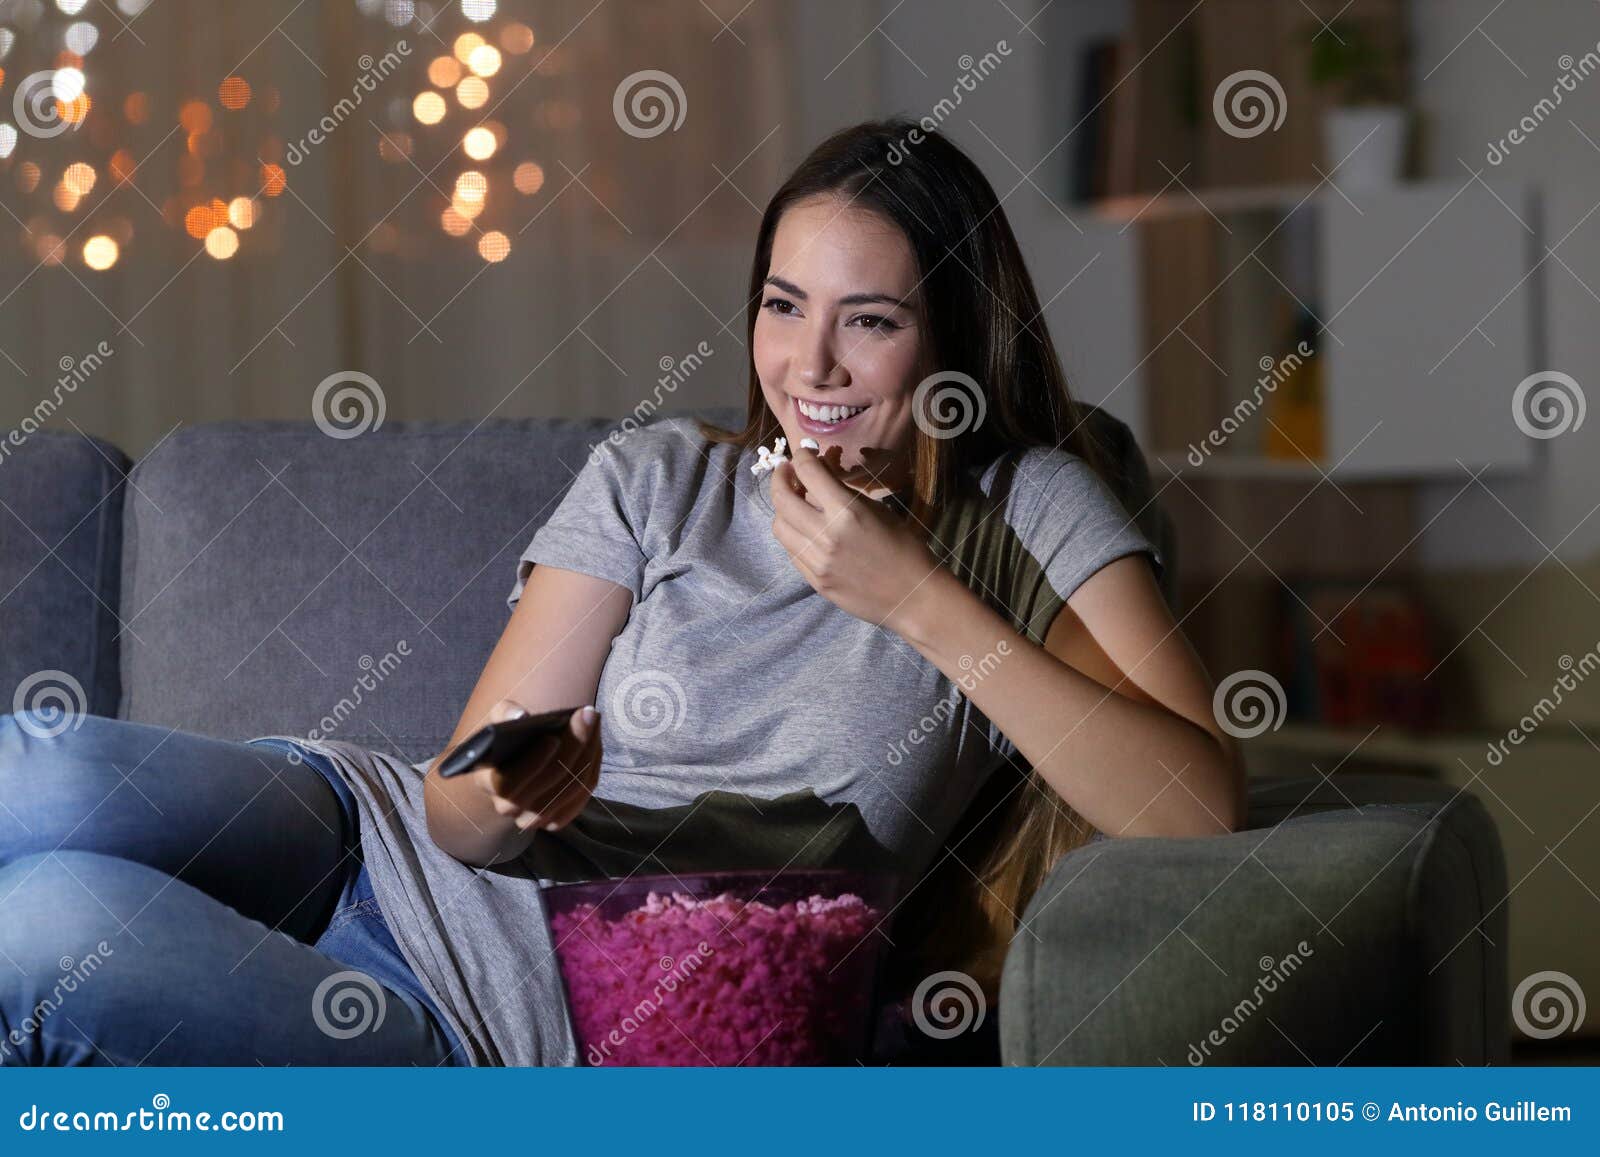 happy woman watching tv in the night at home